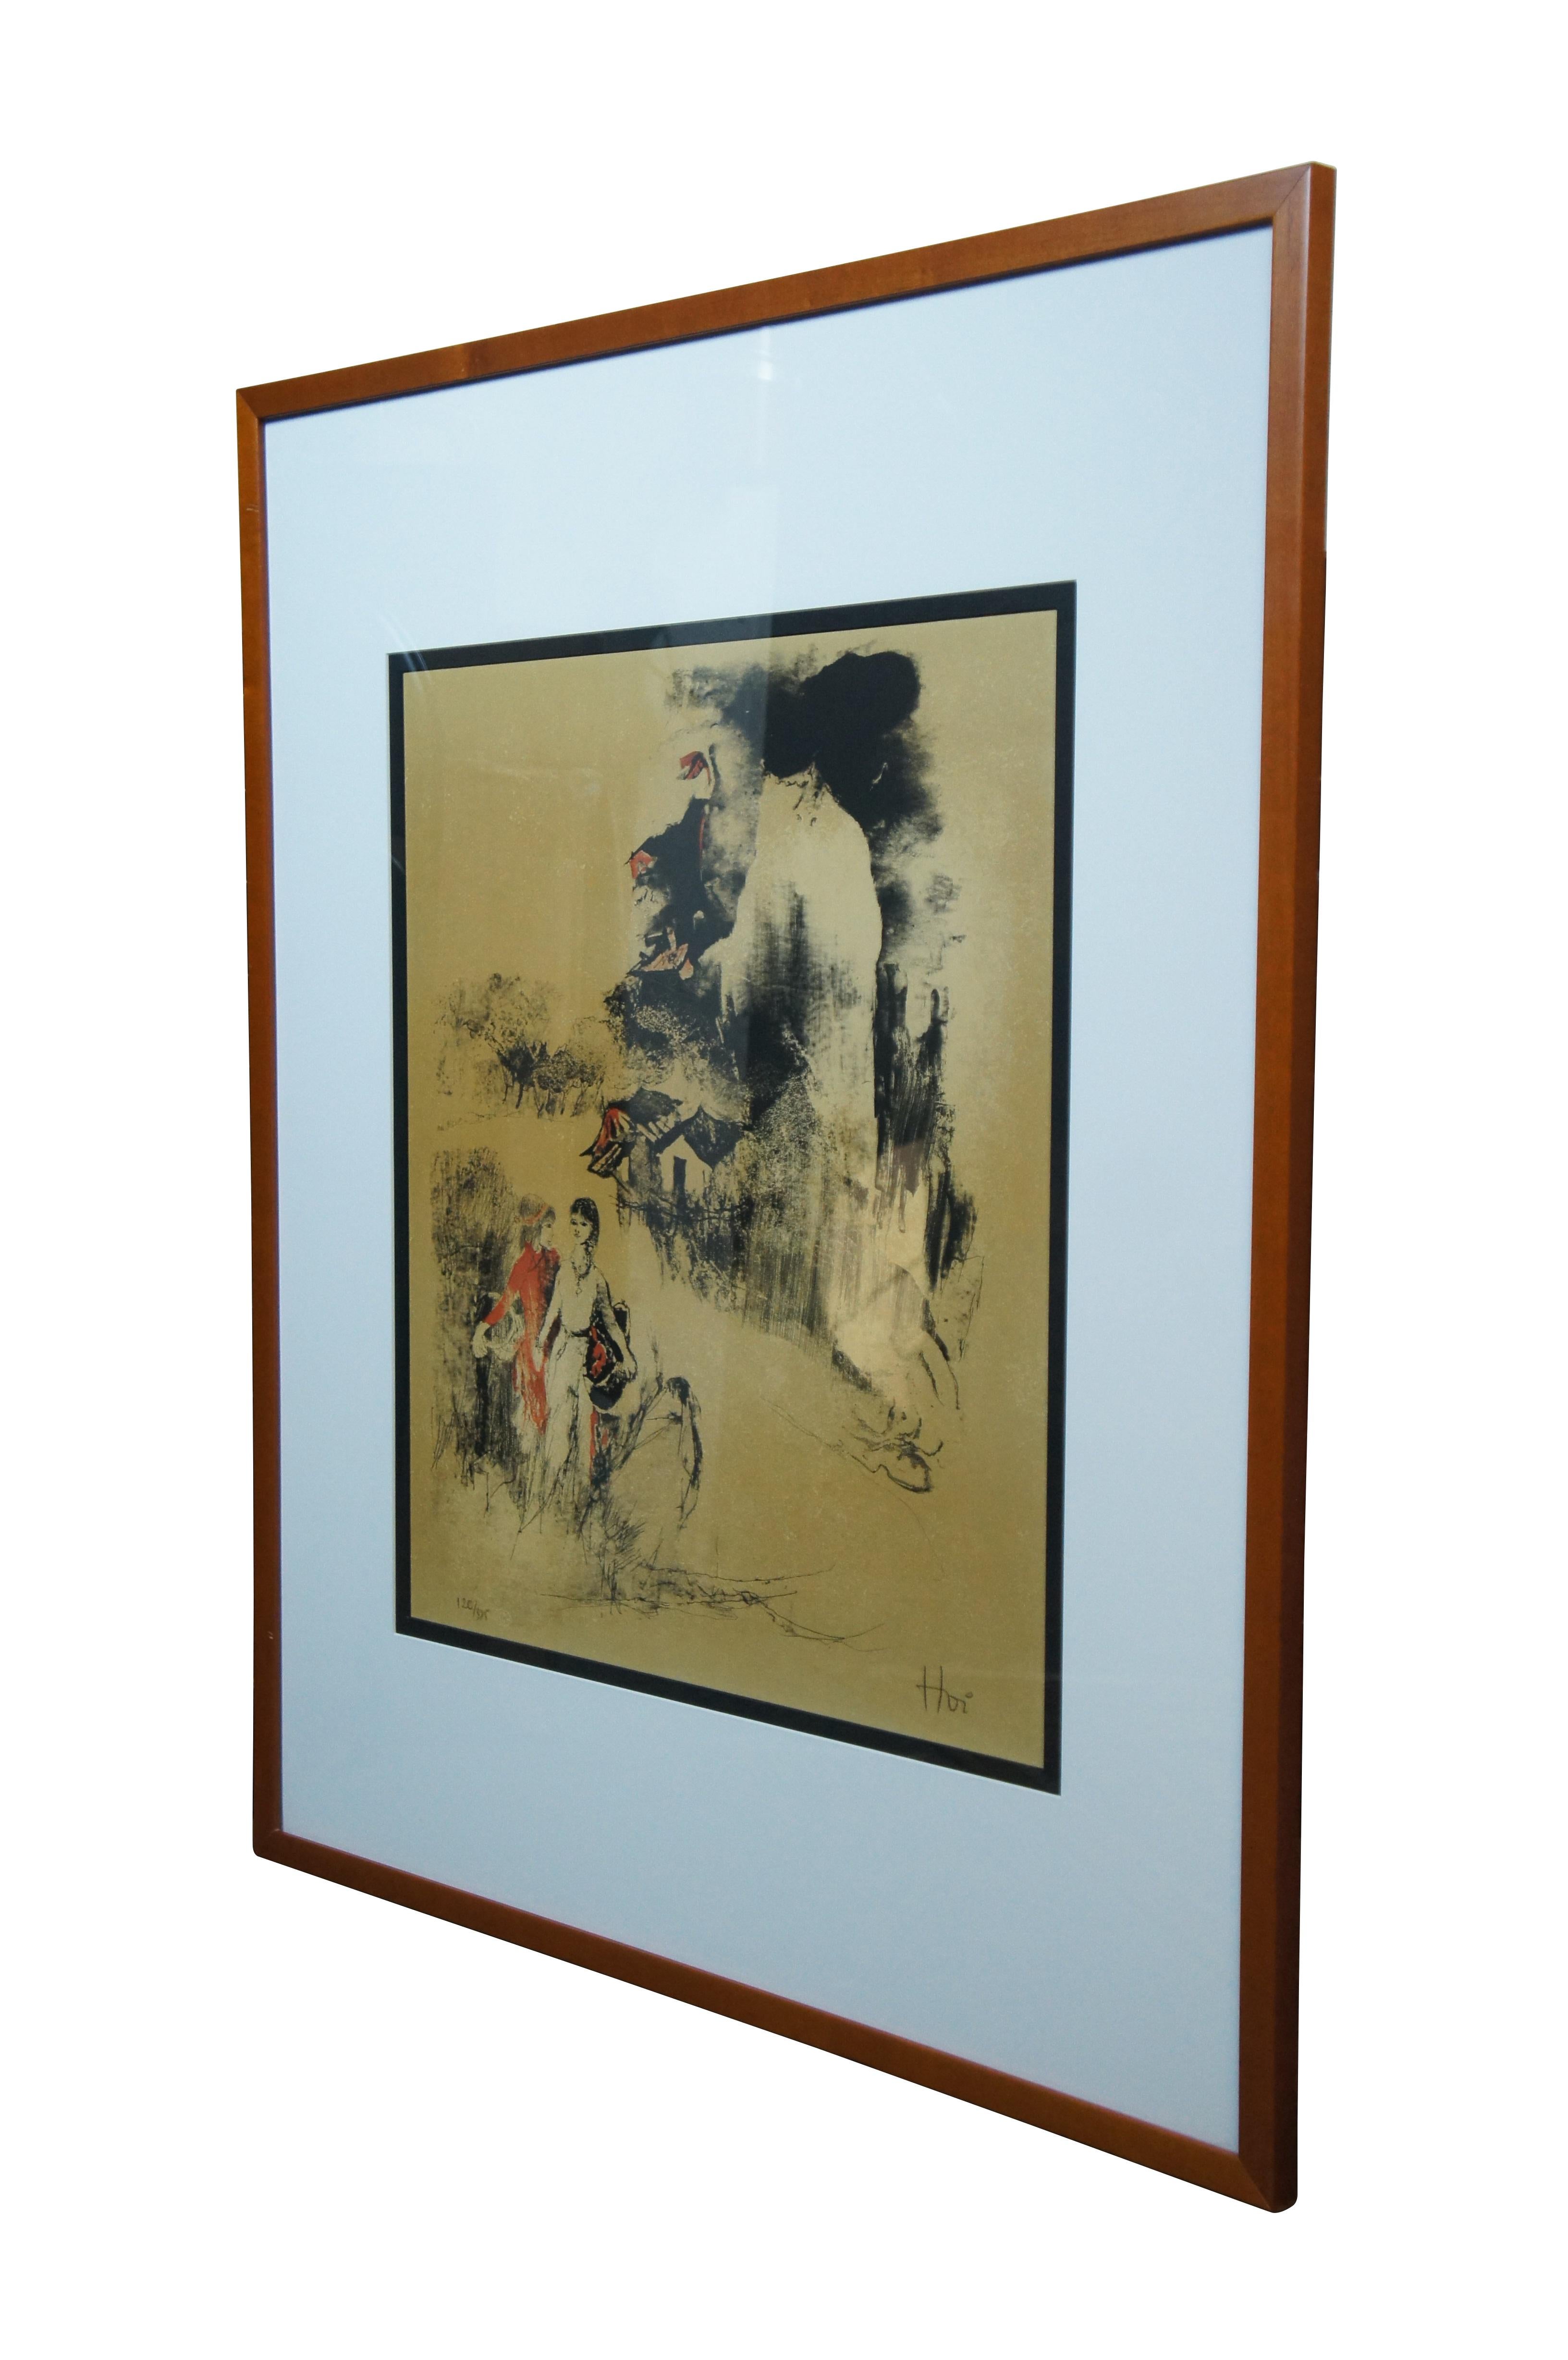 Mid century lithograph print by Hoi Ledabang. Shows a country village landscape at the base of a mountain with a pair of figures carrying baskets in the foreground, done in black and red on golden paper. Signed Hoi (lower right) and numbered 120/325